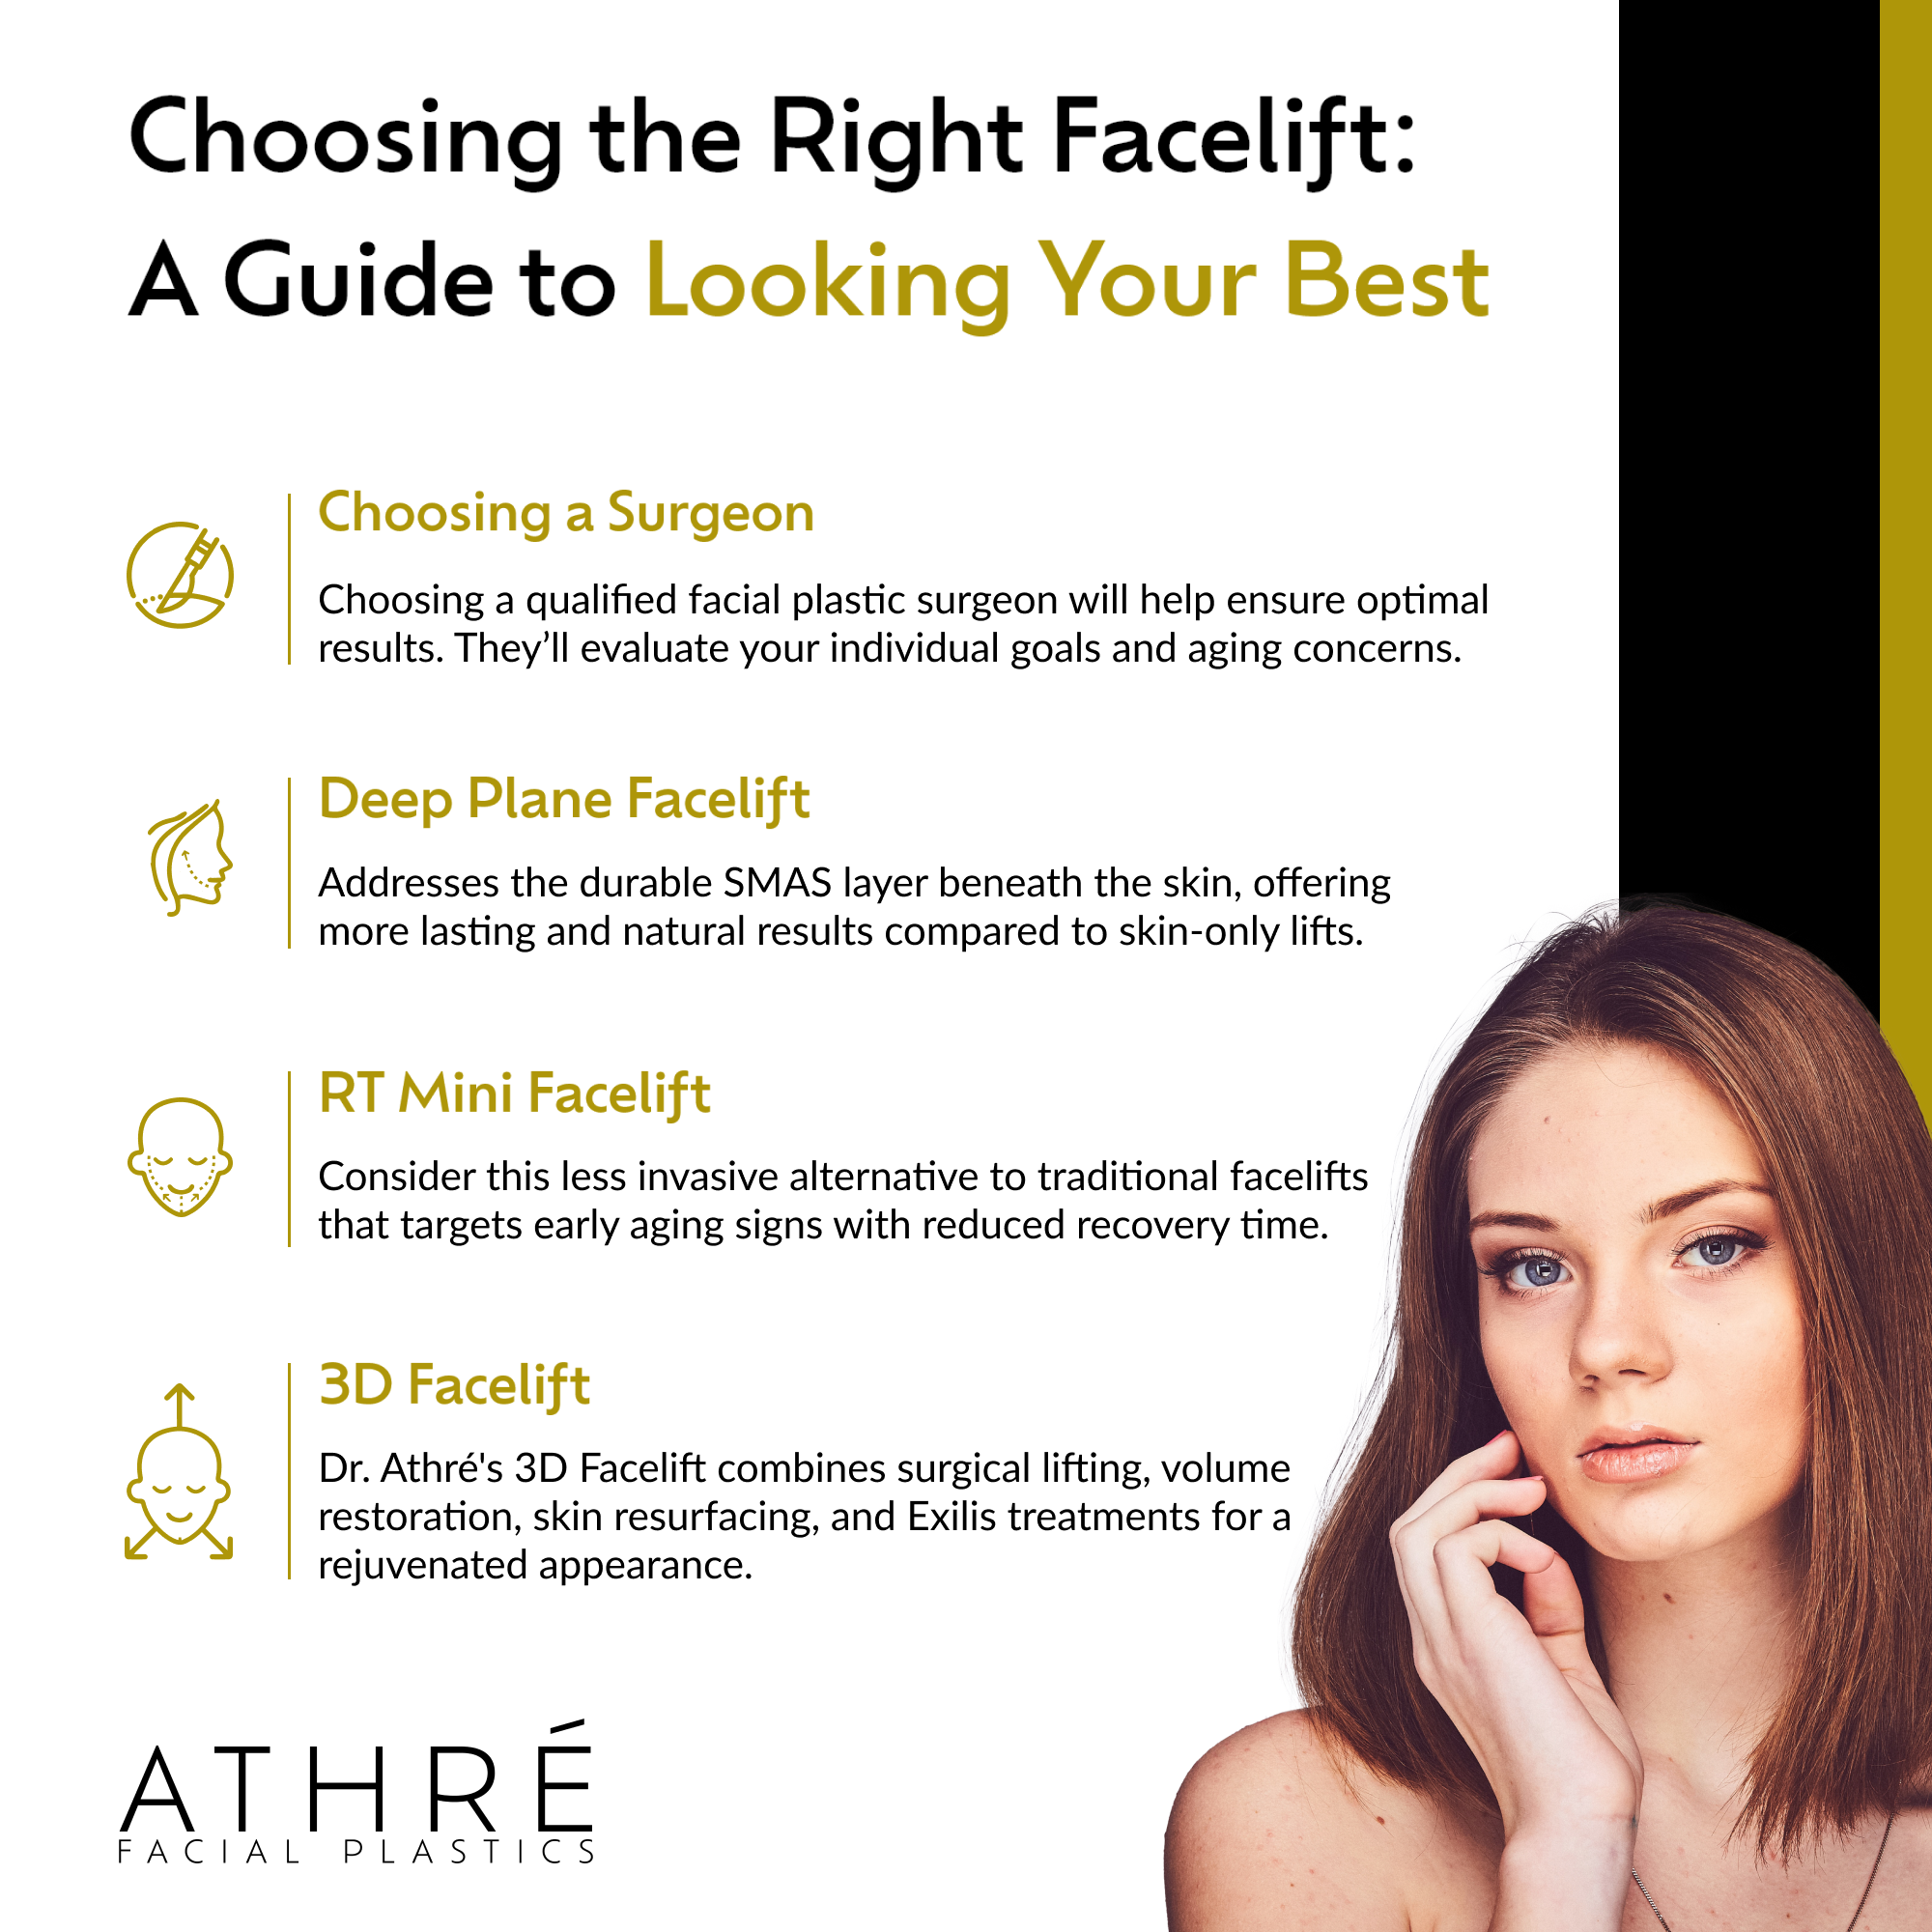 Choosing the Right Facelift: A Guide to Looking Your Best [Infographic]